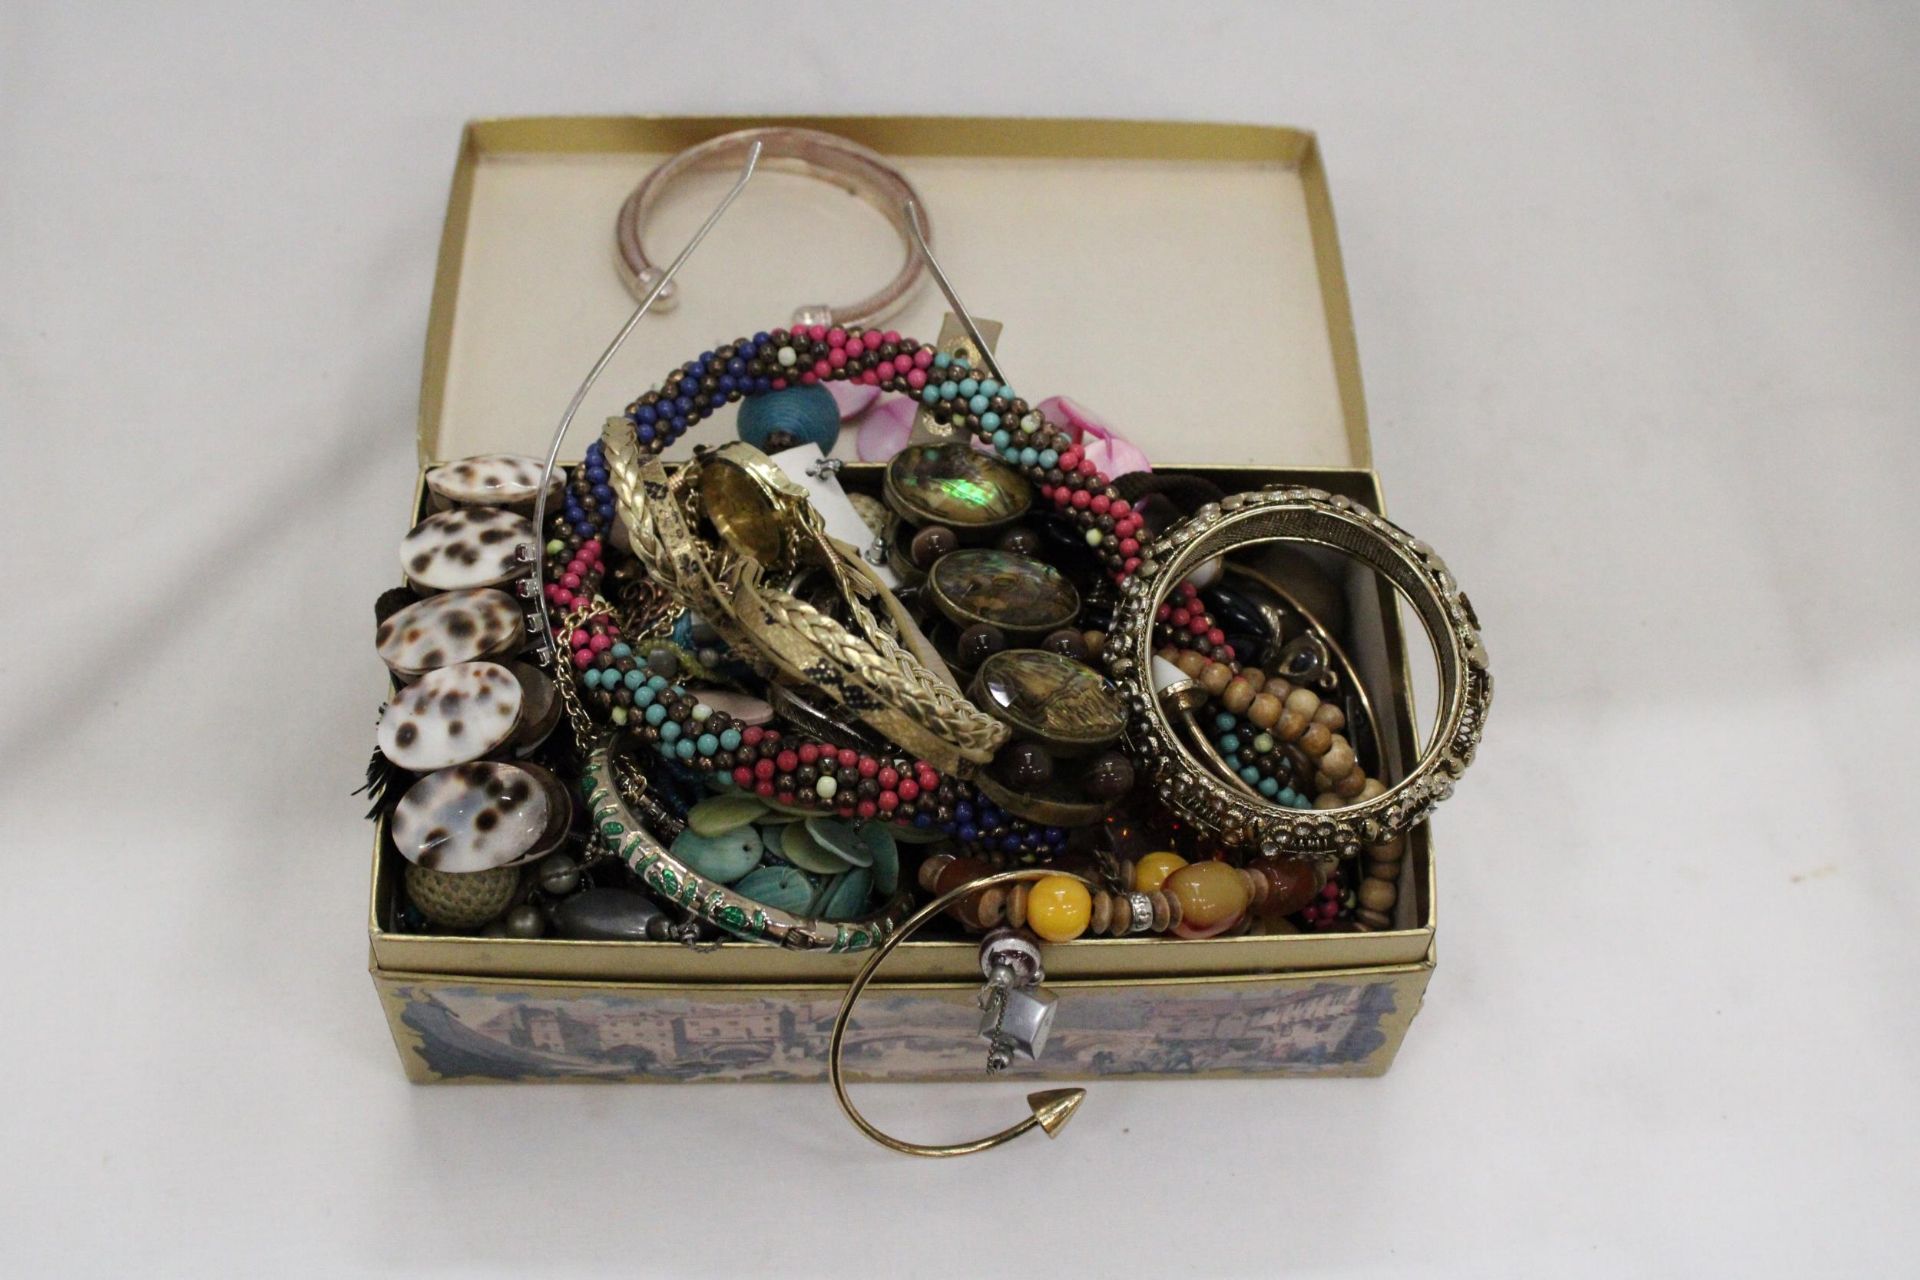 A QUANTITY OF COSTUME JEWELLERY TO INCLUDE NECKLACES, EARRINGS, BANGLES, ETC, IN A DOMED BOX